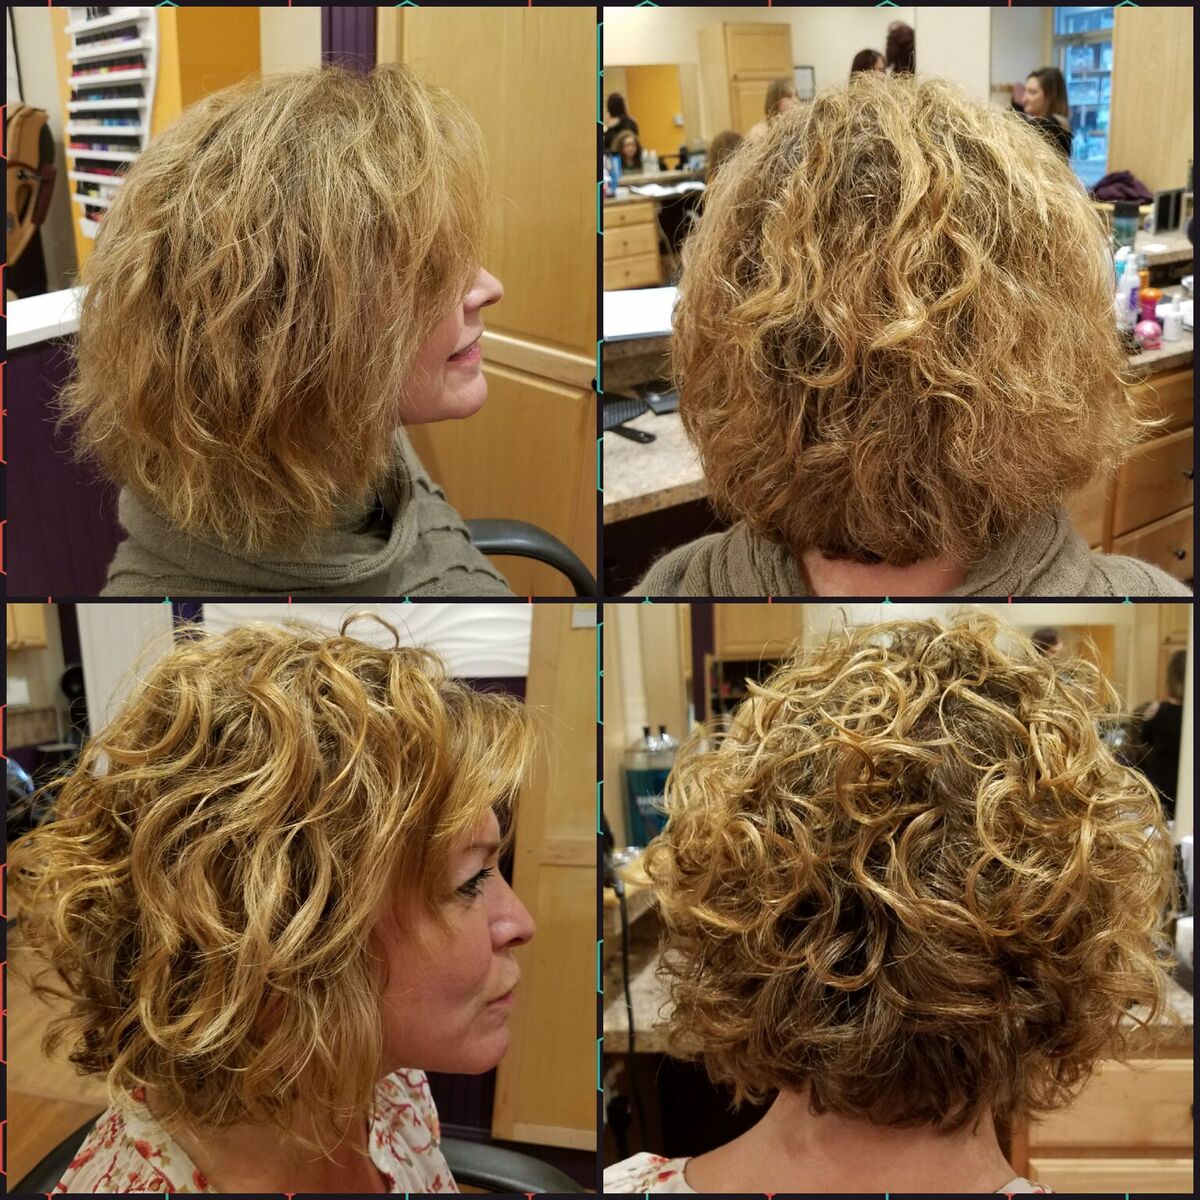 Ouidad Curly Hair Products Consultants in Central Vermont